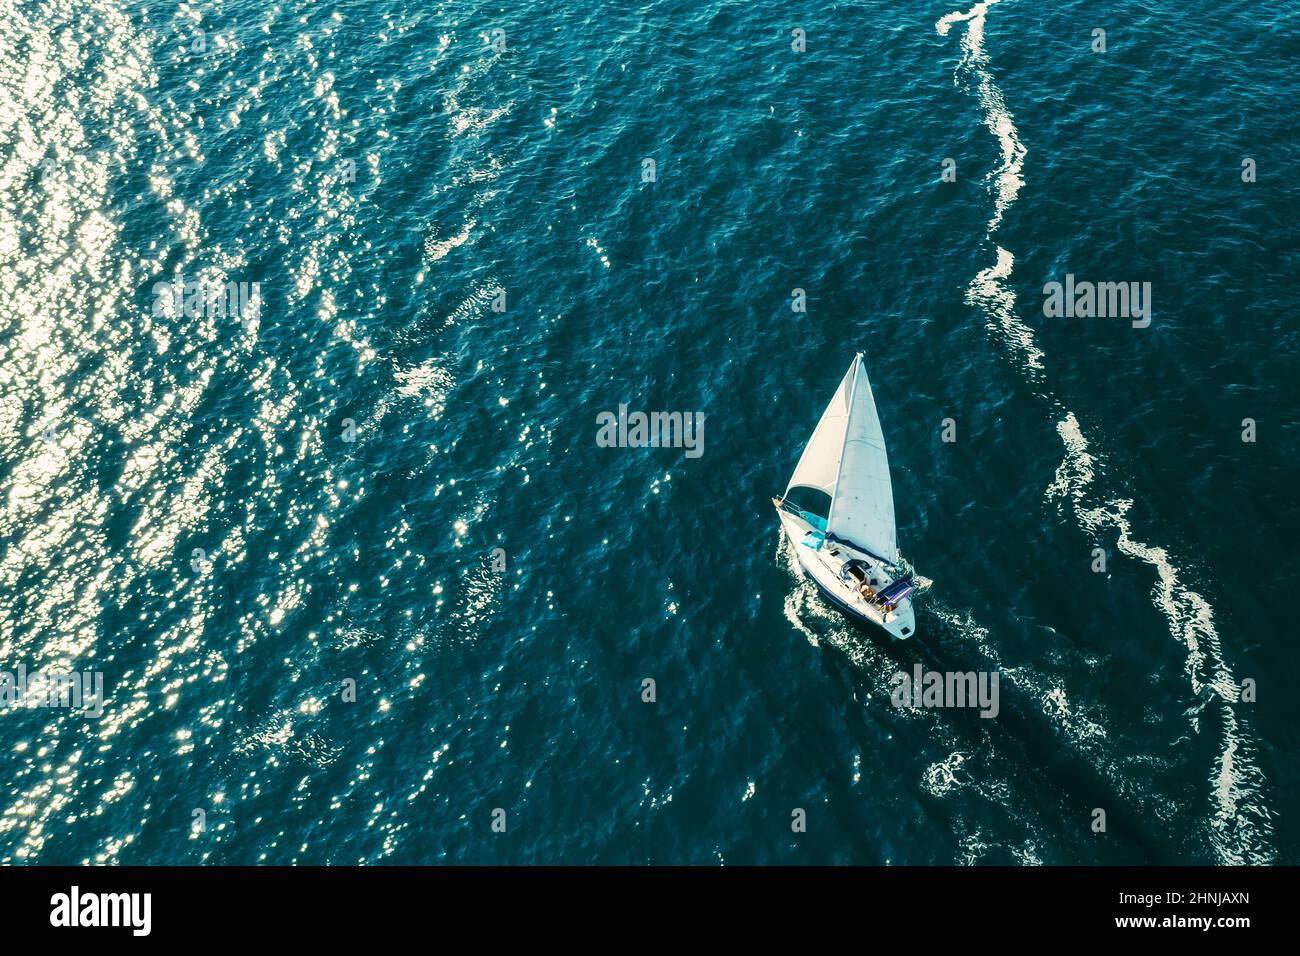 ROVINJ, CZECH REPUBLIC - JULY 03 2021: Sailing vessel leaves white foam trace on surface of Adriatic sea. Bright sunlight reflecting from surface of calm sea rippling water. Aerial view Stock Photo